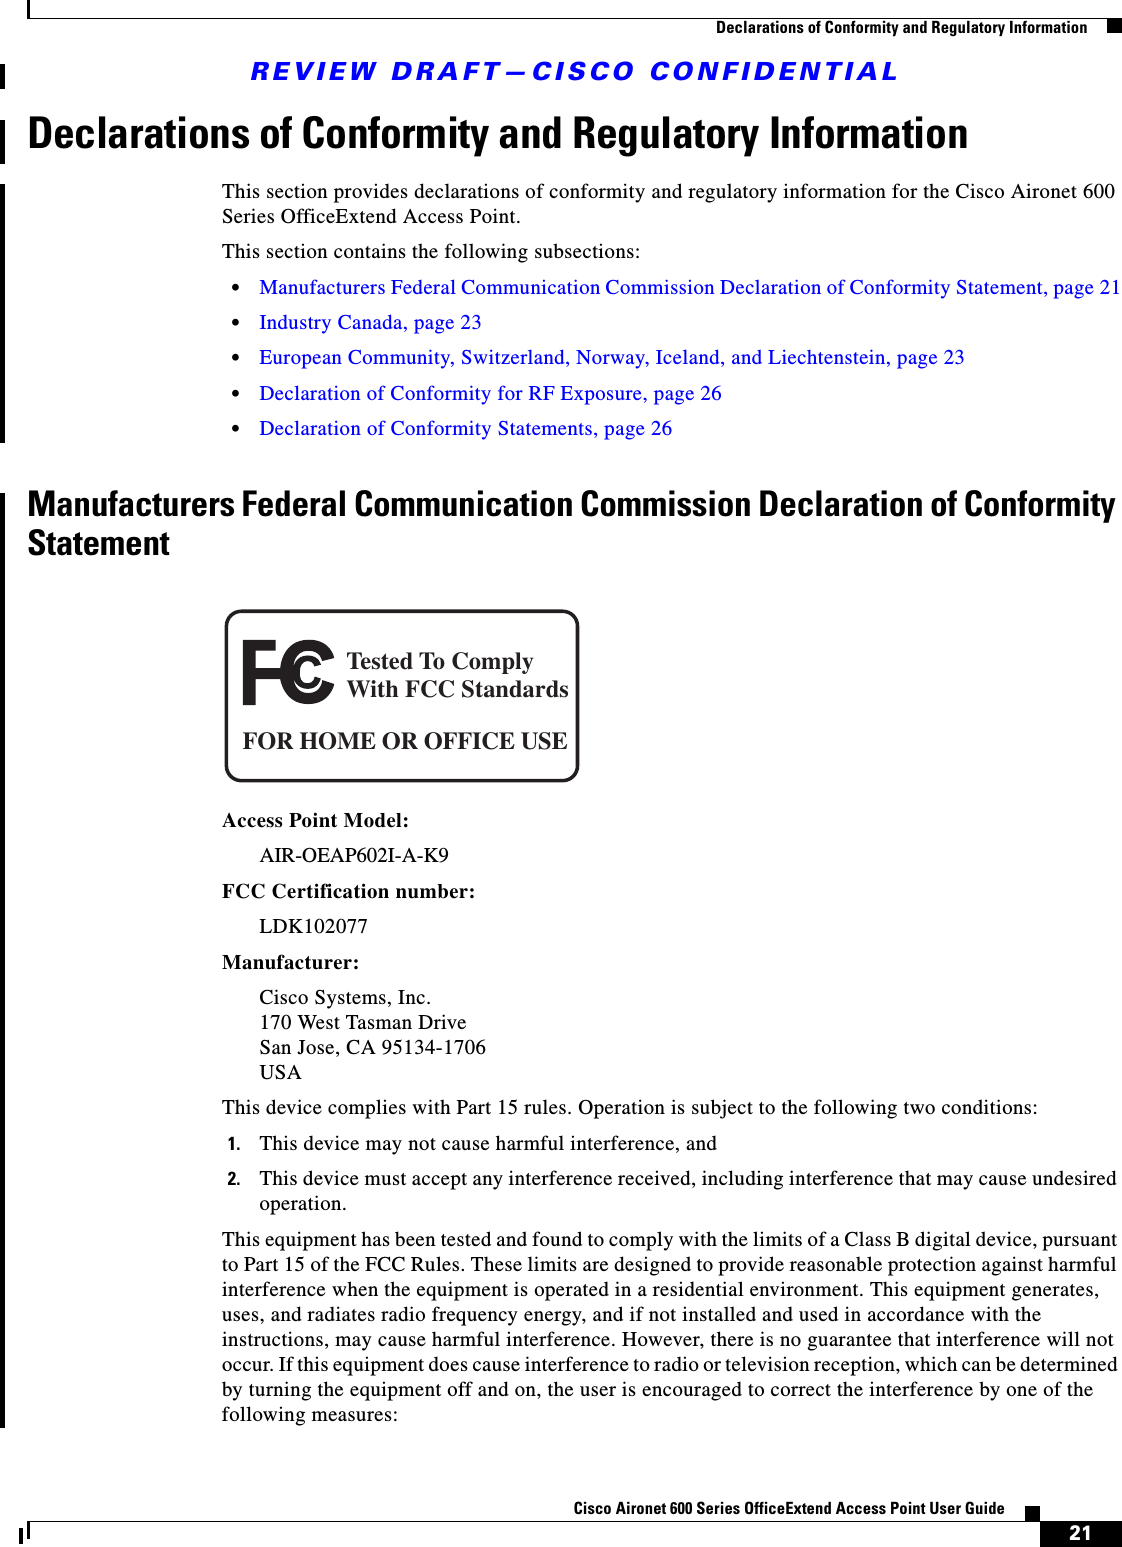 REVIEW DRAFT—CISCO CONFIDENTIAL21Cisco Aironet 600 Series OfficeExtend Access Point User Guide  Declarations of Conformity and Regulatory InformationDeclarations of Conformity and Regulatory InformationThis section provides declarations of conformity and regulatory information for the Cisco Aironet 600 Series OfficeExtend Access Point. This section contains the following subsections:  • Manufacturers Federal Communication Commission Declaration of Conformity Statement, page 21  • Industry Canada, page 23  • European Community, Switzerland, Norway, Iceland, and Liechtenstein, page 23  • Declaration of Conformity for RF Exposure, page 26  • Declaration of Conformity Statements, page 26Manufacturers Federal Communication Commission Declaration of Conformity StatementAccess Point Model:AIR-OEAP602I-A-K9FCC Certification number: LDK102077Manufacturer:Cisco Systems, Inc. 170 West Tasman Drive San Jose, CA 95134-1706 USAThis device complies with Part 15 rules. Operation is subject to the following two conditions:1. This device may not cause harmful interference, and2. This device must accept any interference received, including interference that may cause undesired operation.This equipment has been tested and found to comply with the limits of a Class B digital device, pursuant to Part 15 of the FCC Rules. These limits are designed to provide reasonable protection against harmful interference when the equipment is operated in a residential environment. This equipment generates, uses, and radiates radio frequency energy, and if not installed and used in accordance with the instructions, may cause harmful interference. However, there is no guarantee that interference will not occur. If this equipment does cause interference to radio or television reception, which can be determined by turning the equipment off and on, the user is encouraged to correct the interference by one of the following measures:Tested To ComplyWith FCC StandardsFOR HOME OR OFFICE USE